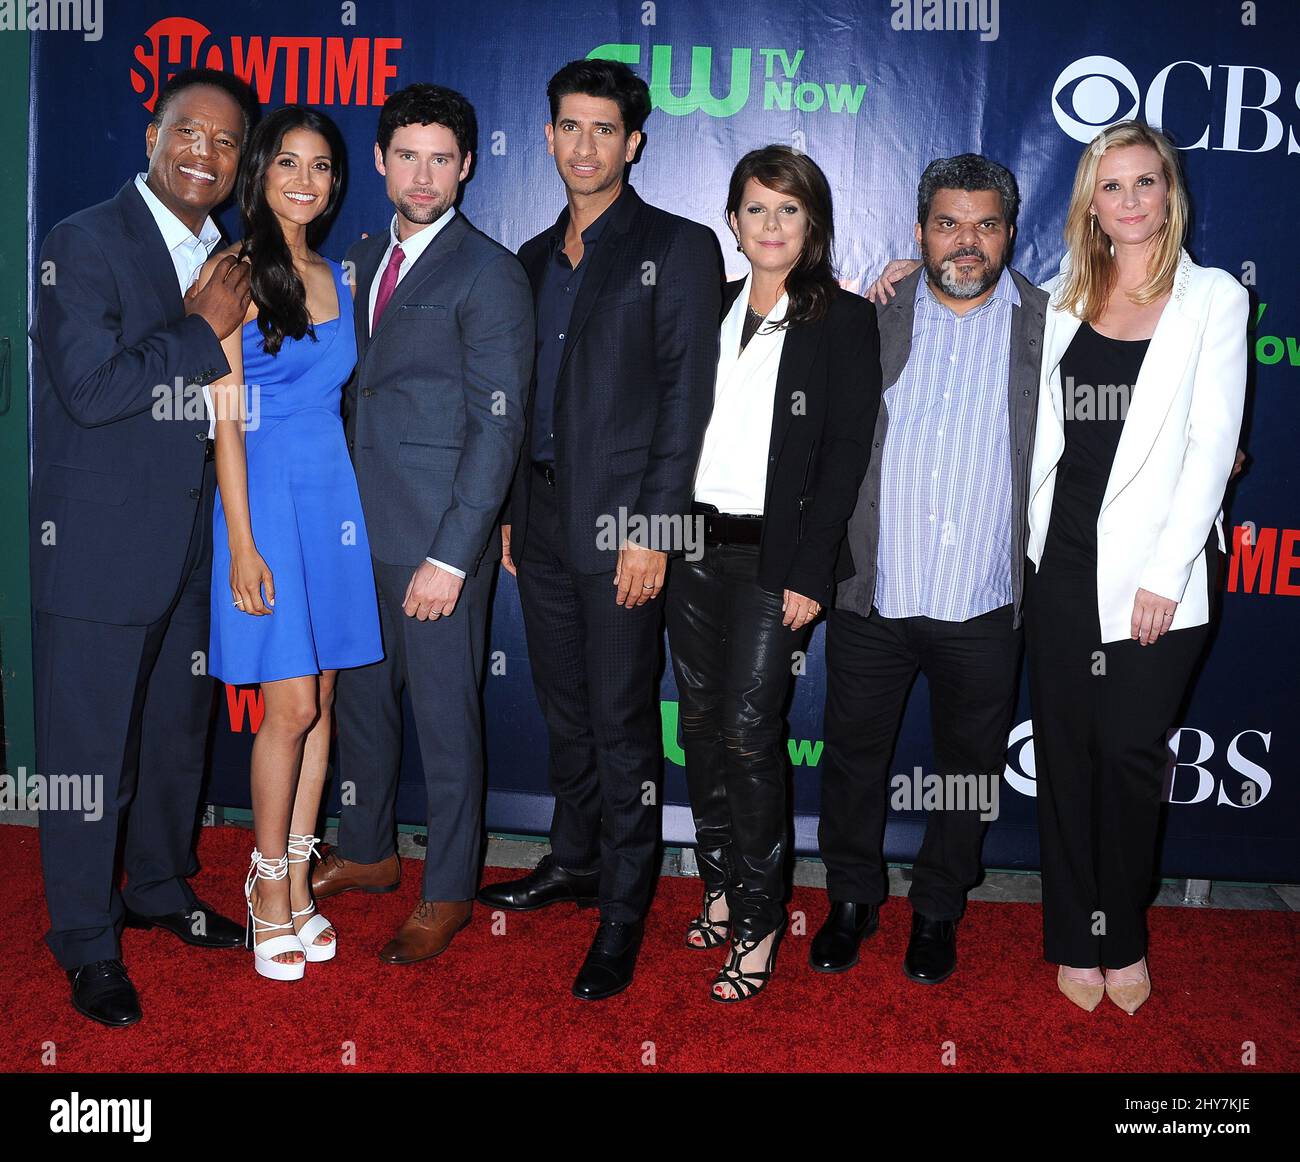 William Allen Young, Melanie Chandra, Ben Hollingsworth, Raza Jaffrey, Marcia Cross, Luis Guzman and Bonnie Somerville attending the CBS, The CW and Showtime Summer TCA press tour. Stock Photo